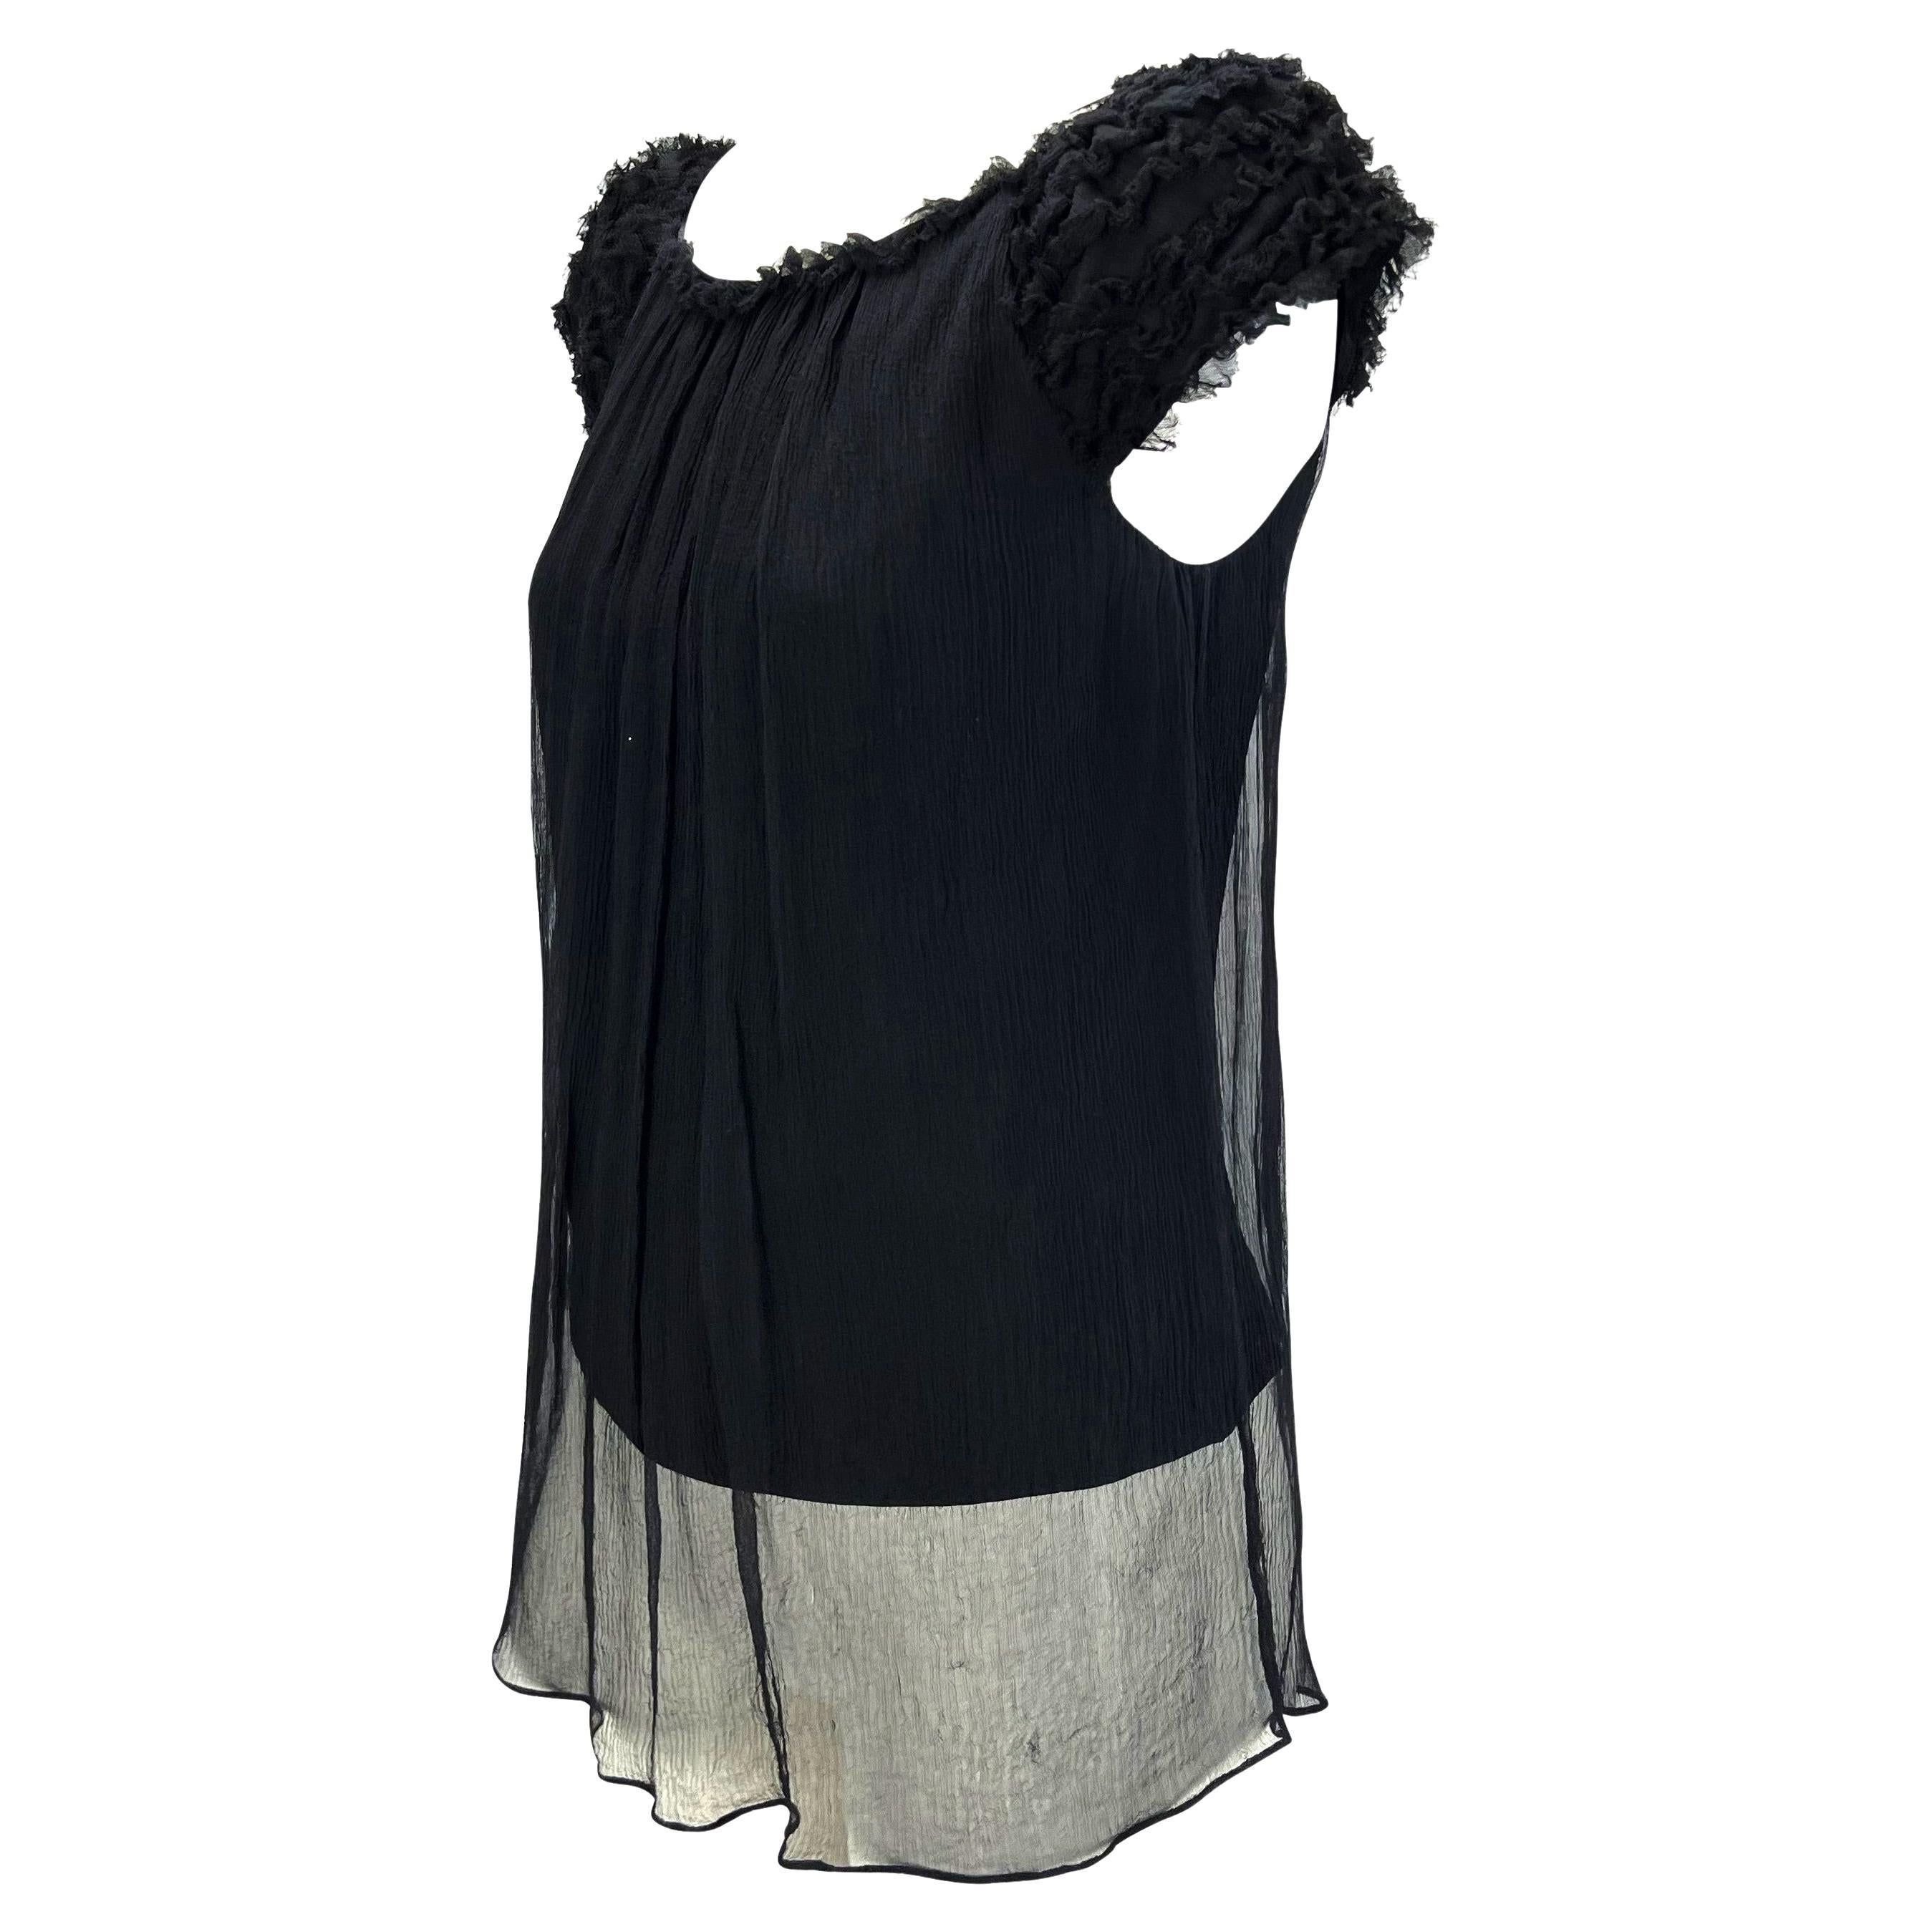 F/W 2001 Gucci by Tom Ford Runway Black Crepe Silk Chiffon Sheer Top In Good Condition For Sale In West Hollywood, CA